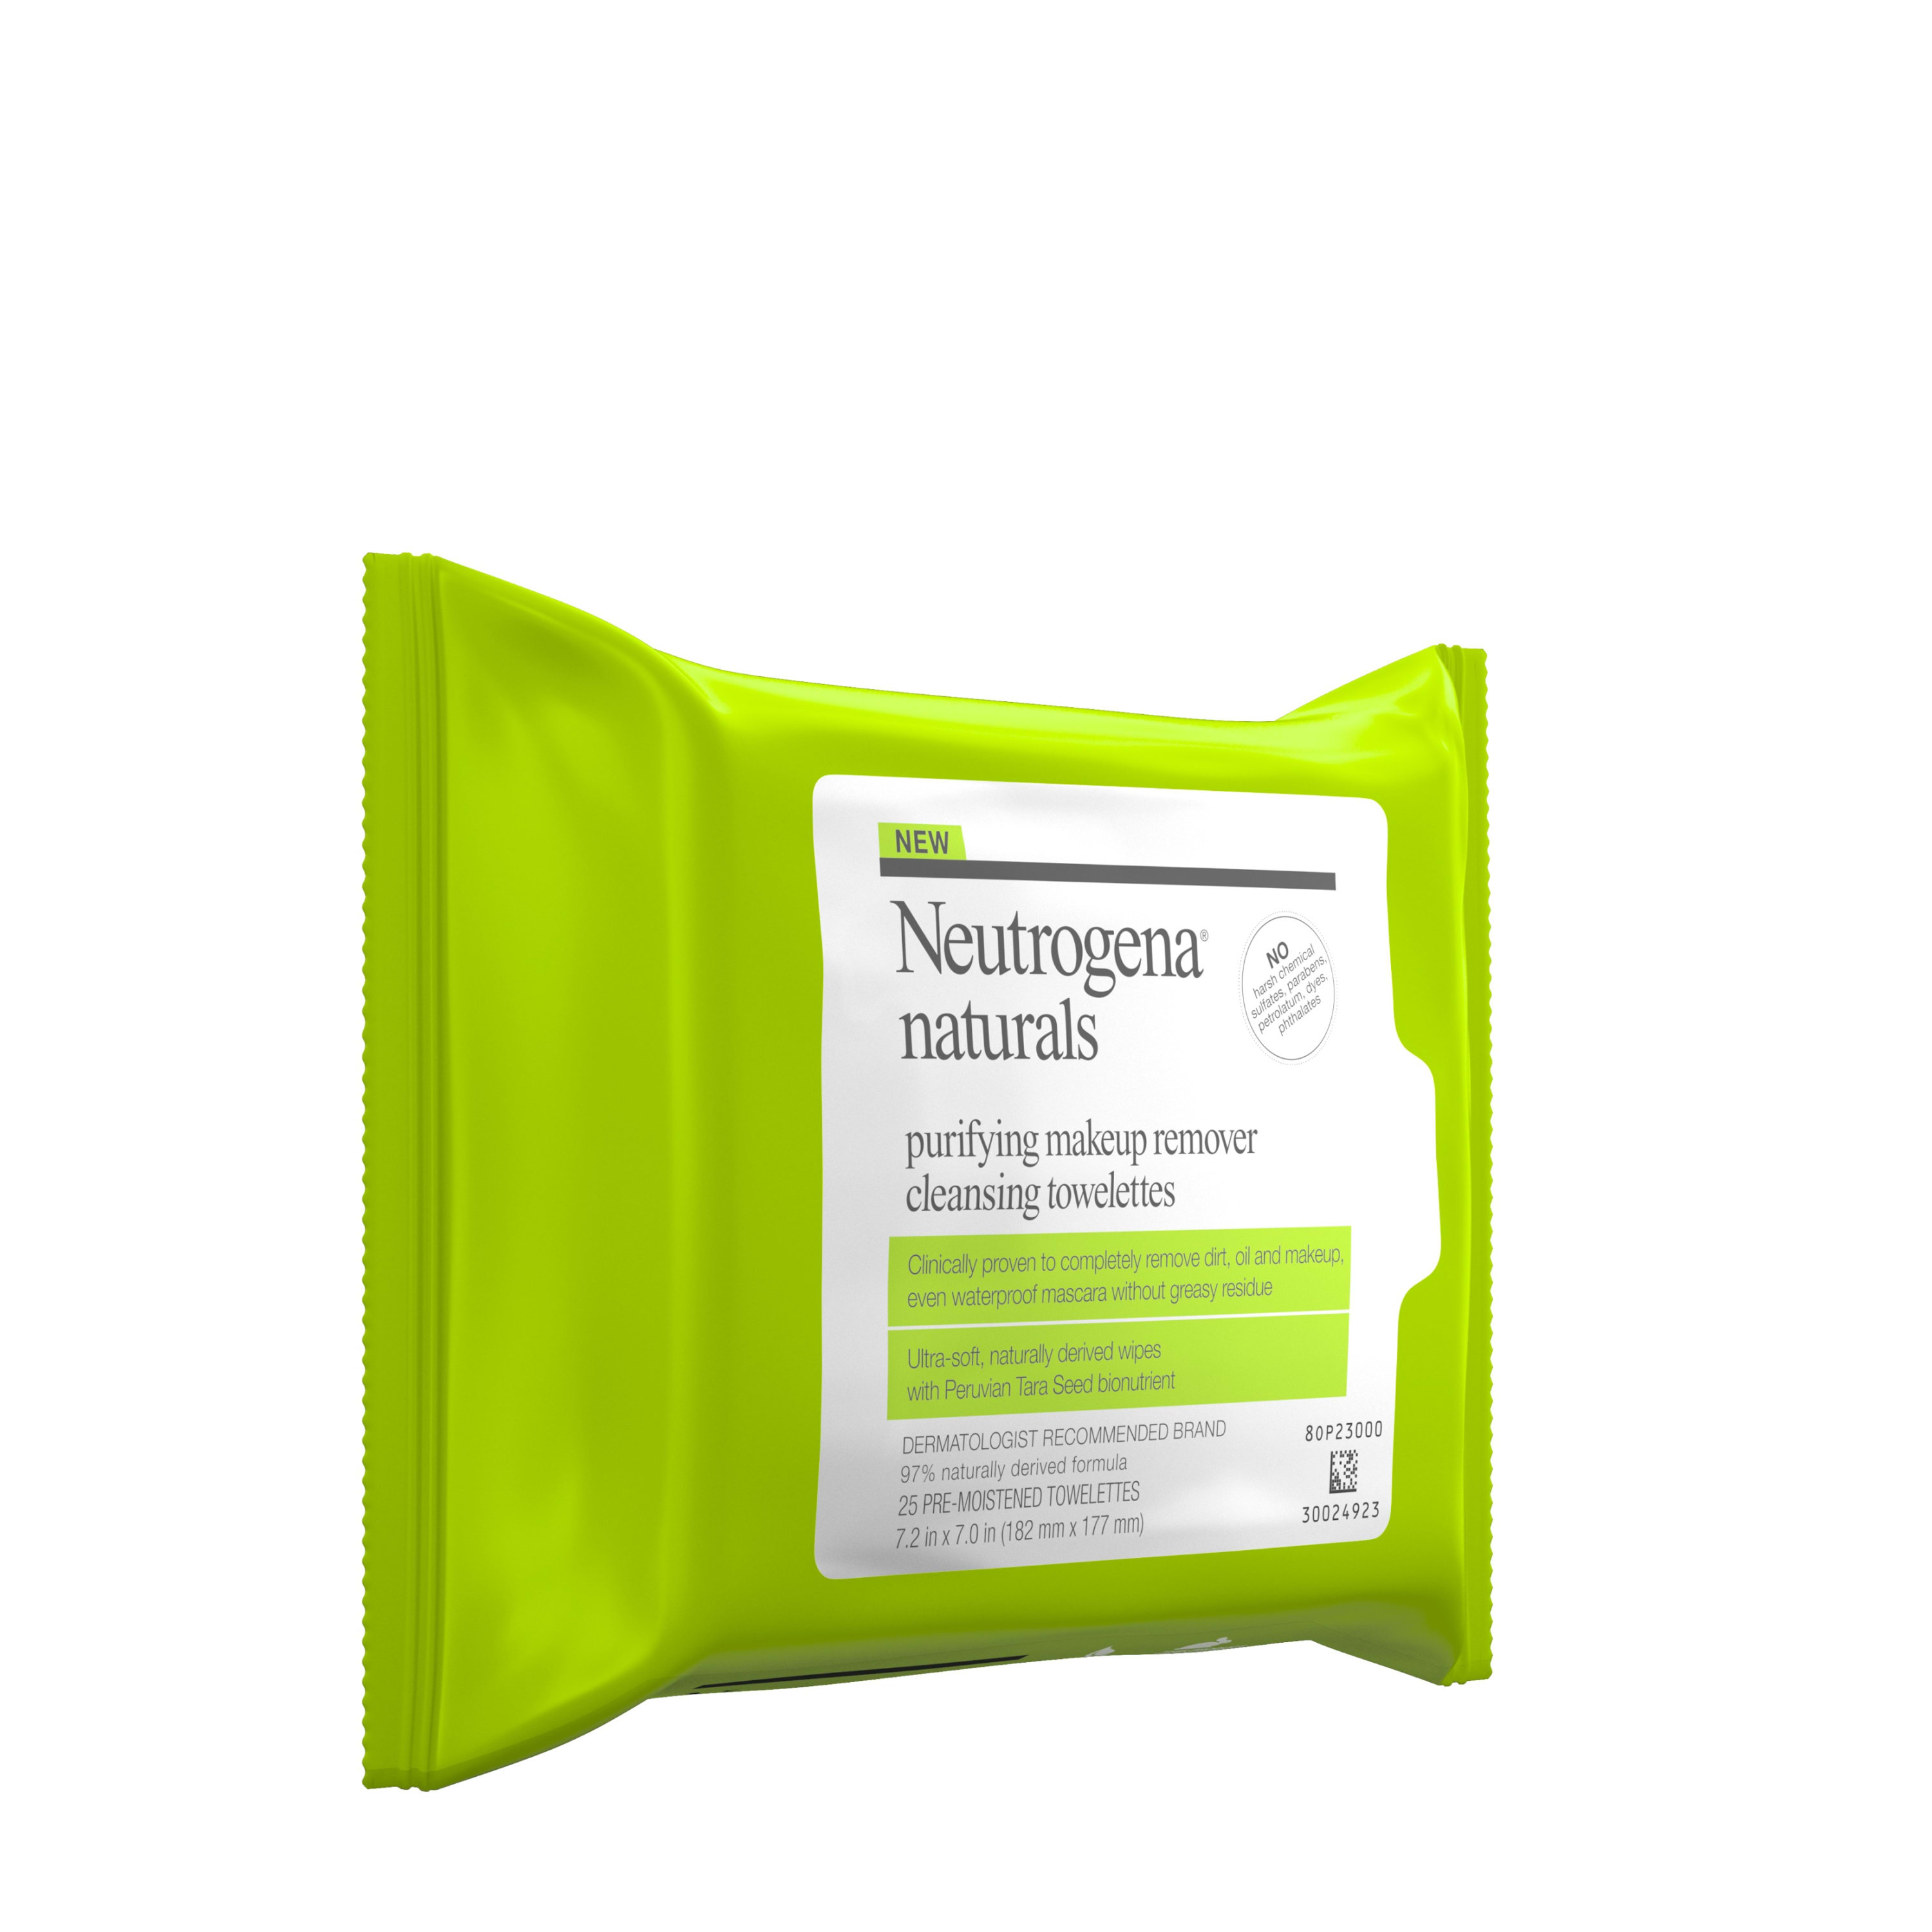 Neutrogena Naturals Purifying Makeup Remover Cleansing Wipes, 25 ct. - image 4 of 9